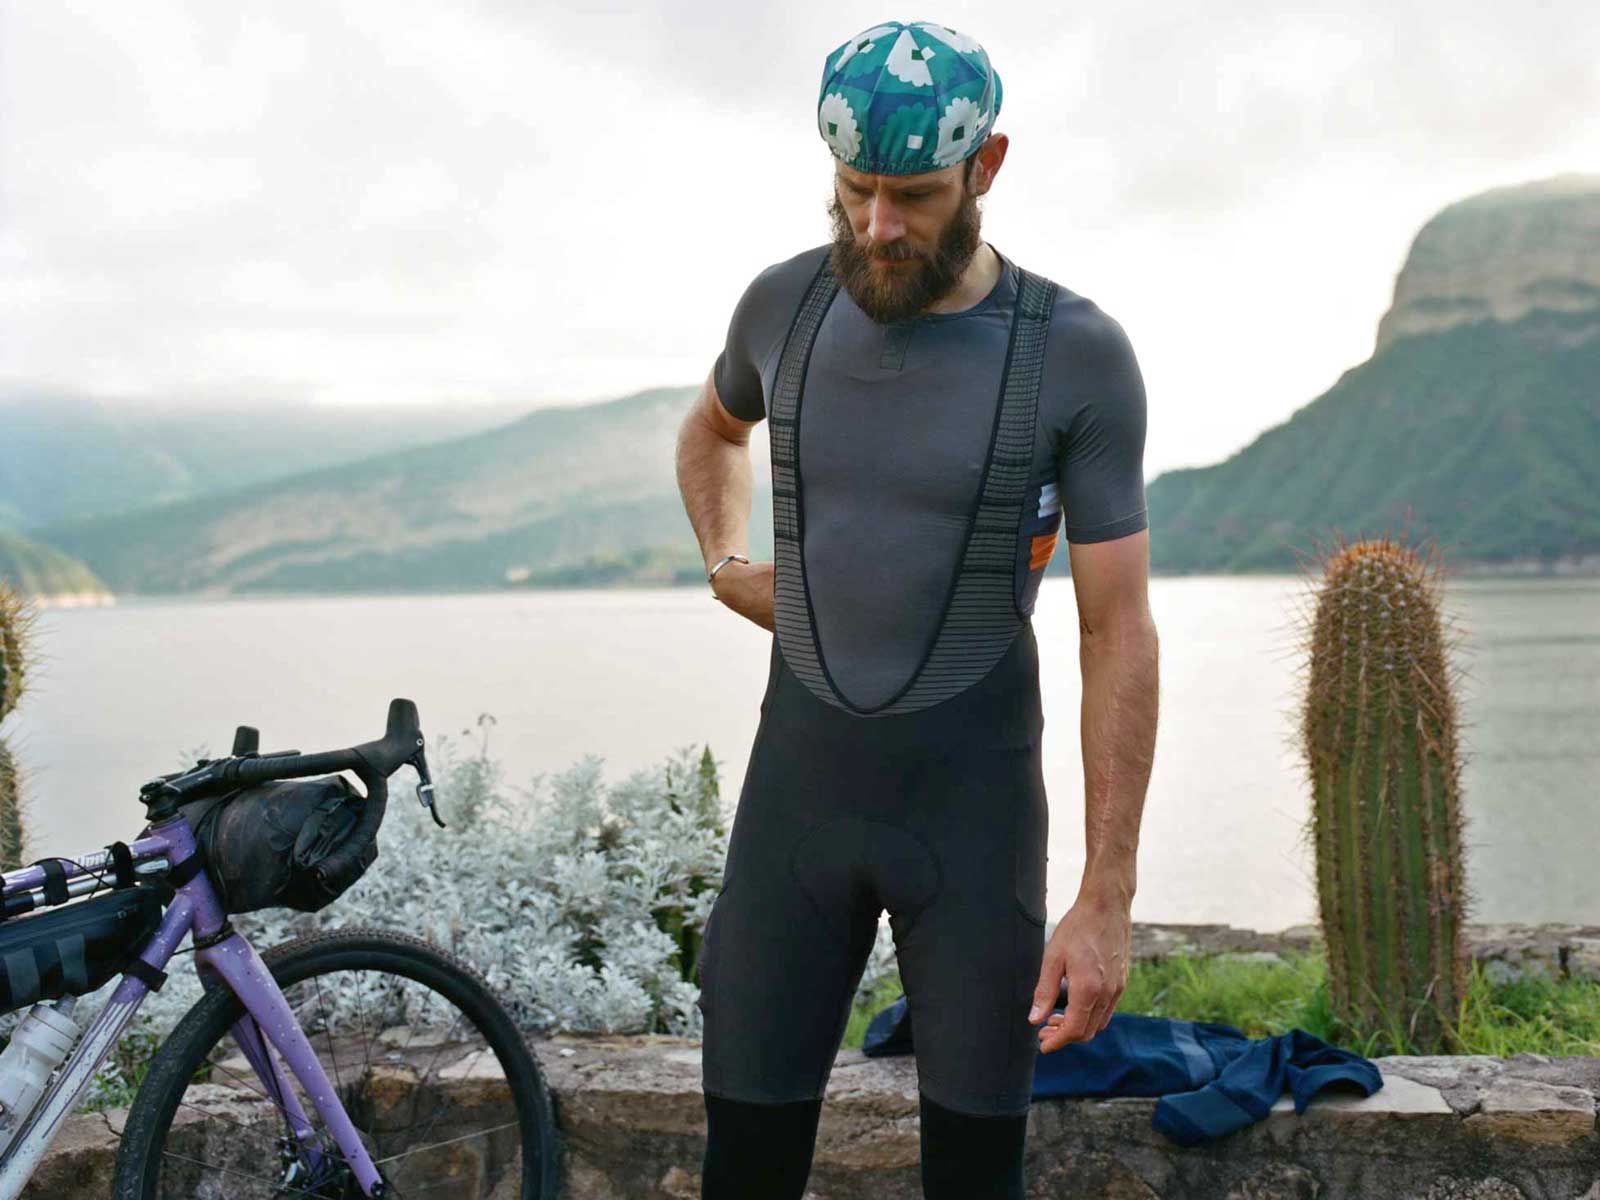 Rapha Explore rides off the road as Brevet offshoot, with cargo